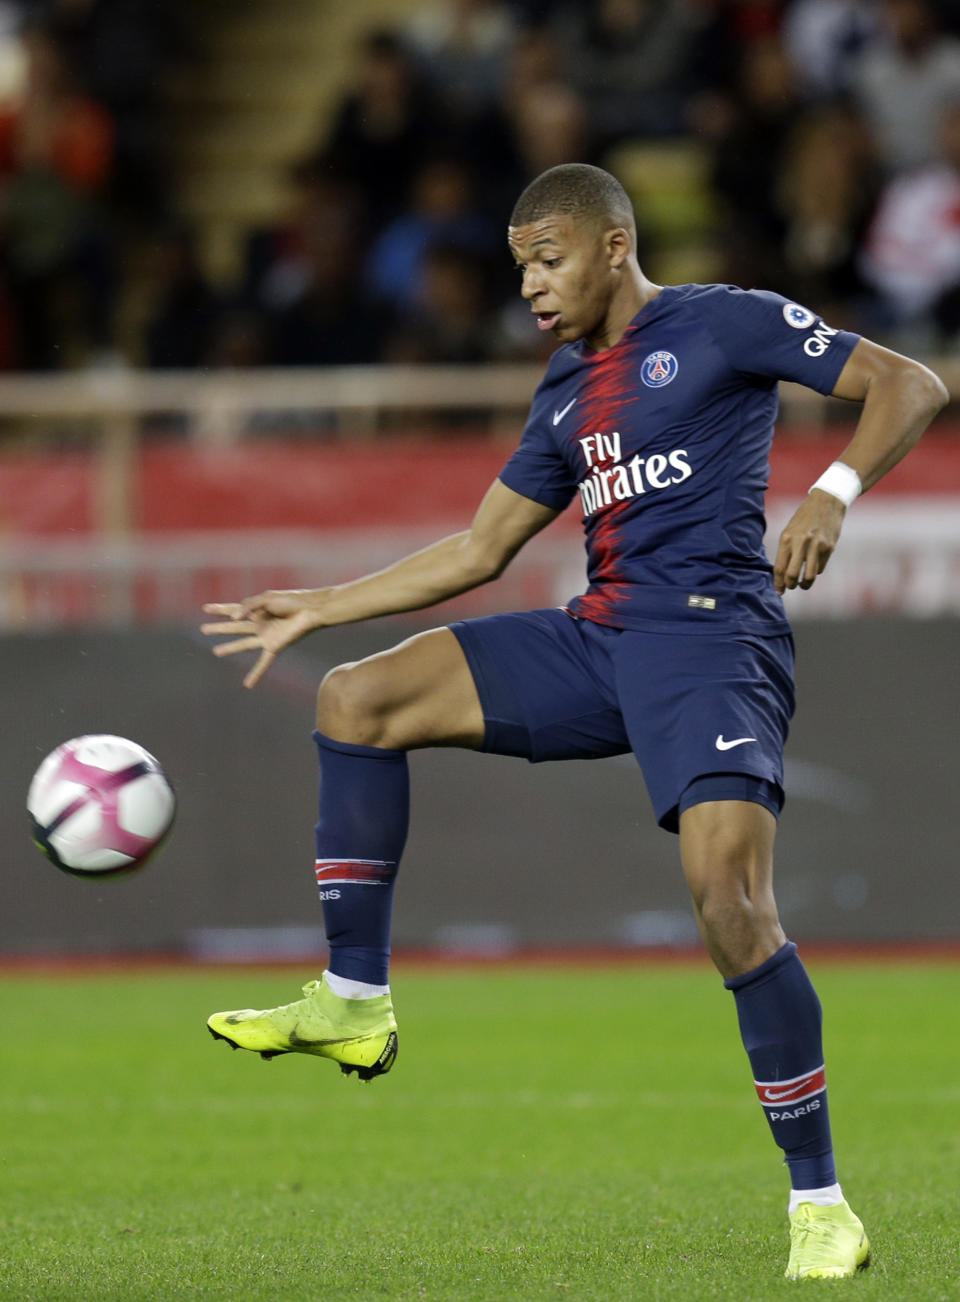 PSG's Kylian Mbappe controls the ball during the French League One soccer match between AS Monaco and Paris Saint-Germain at Stade Louis II in Monaco, Sunday, Nov. 11, 2018 (AP Photo/Claude Paris)